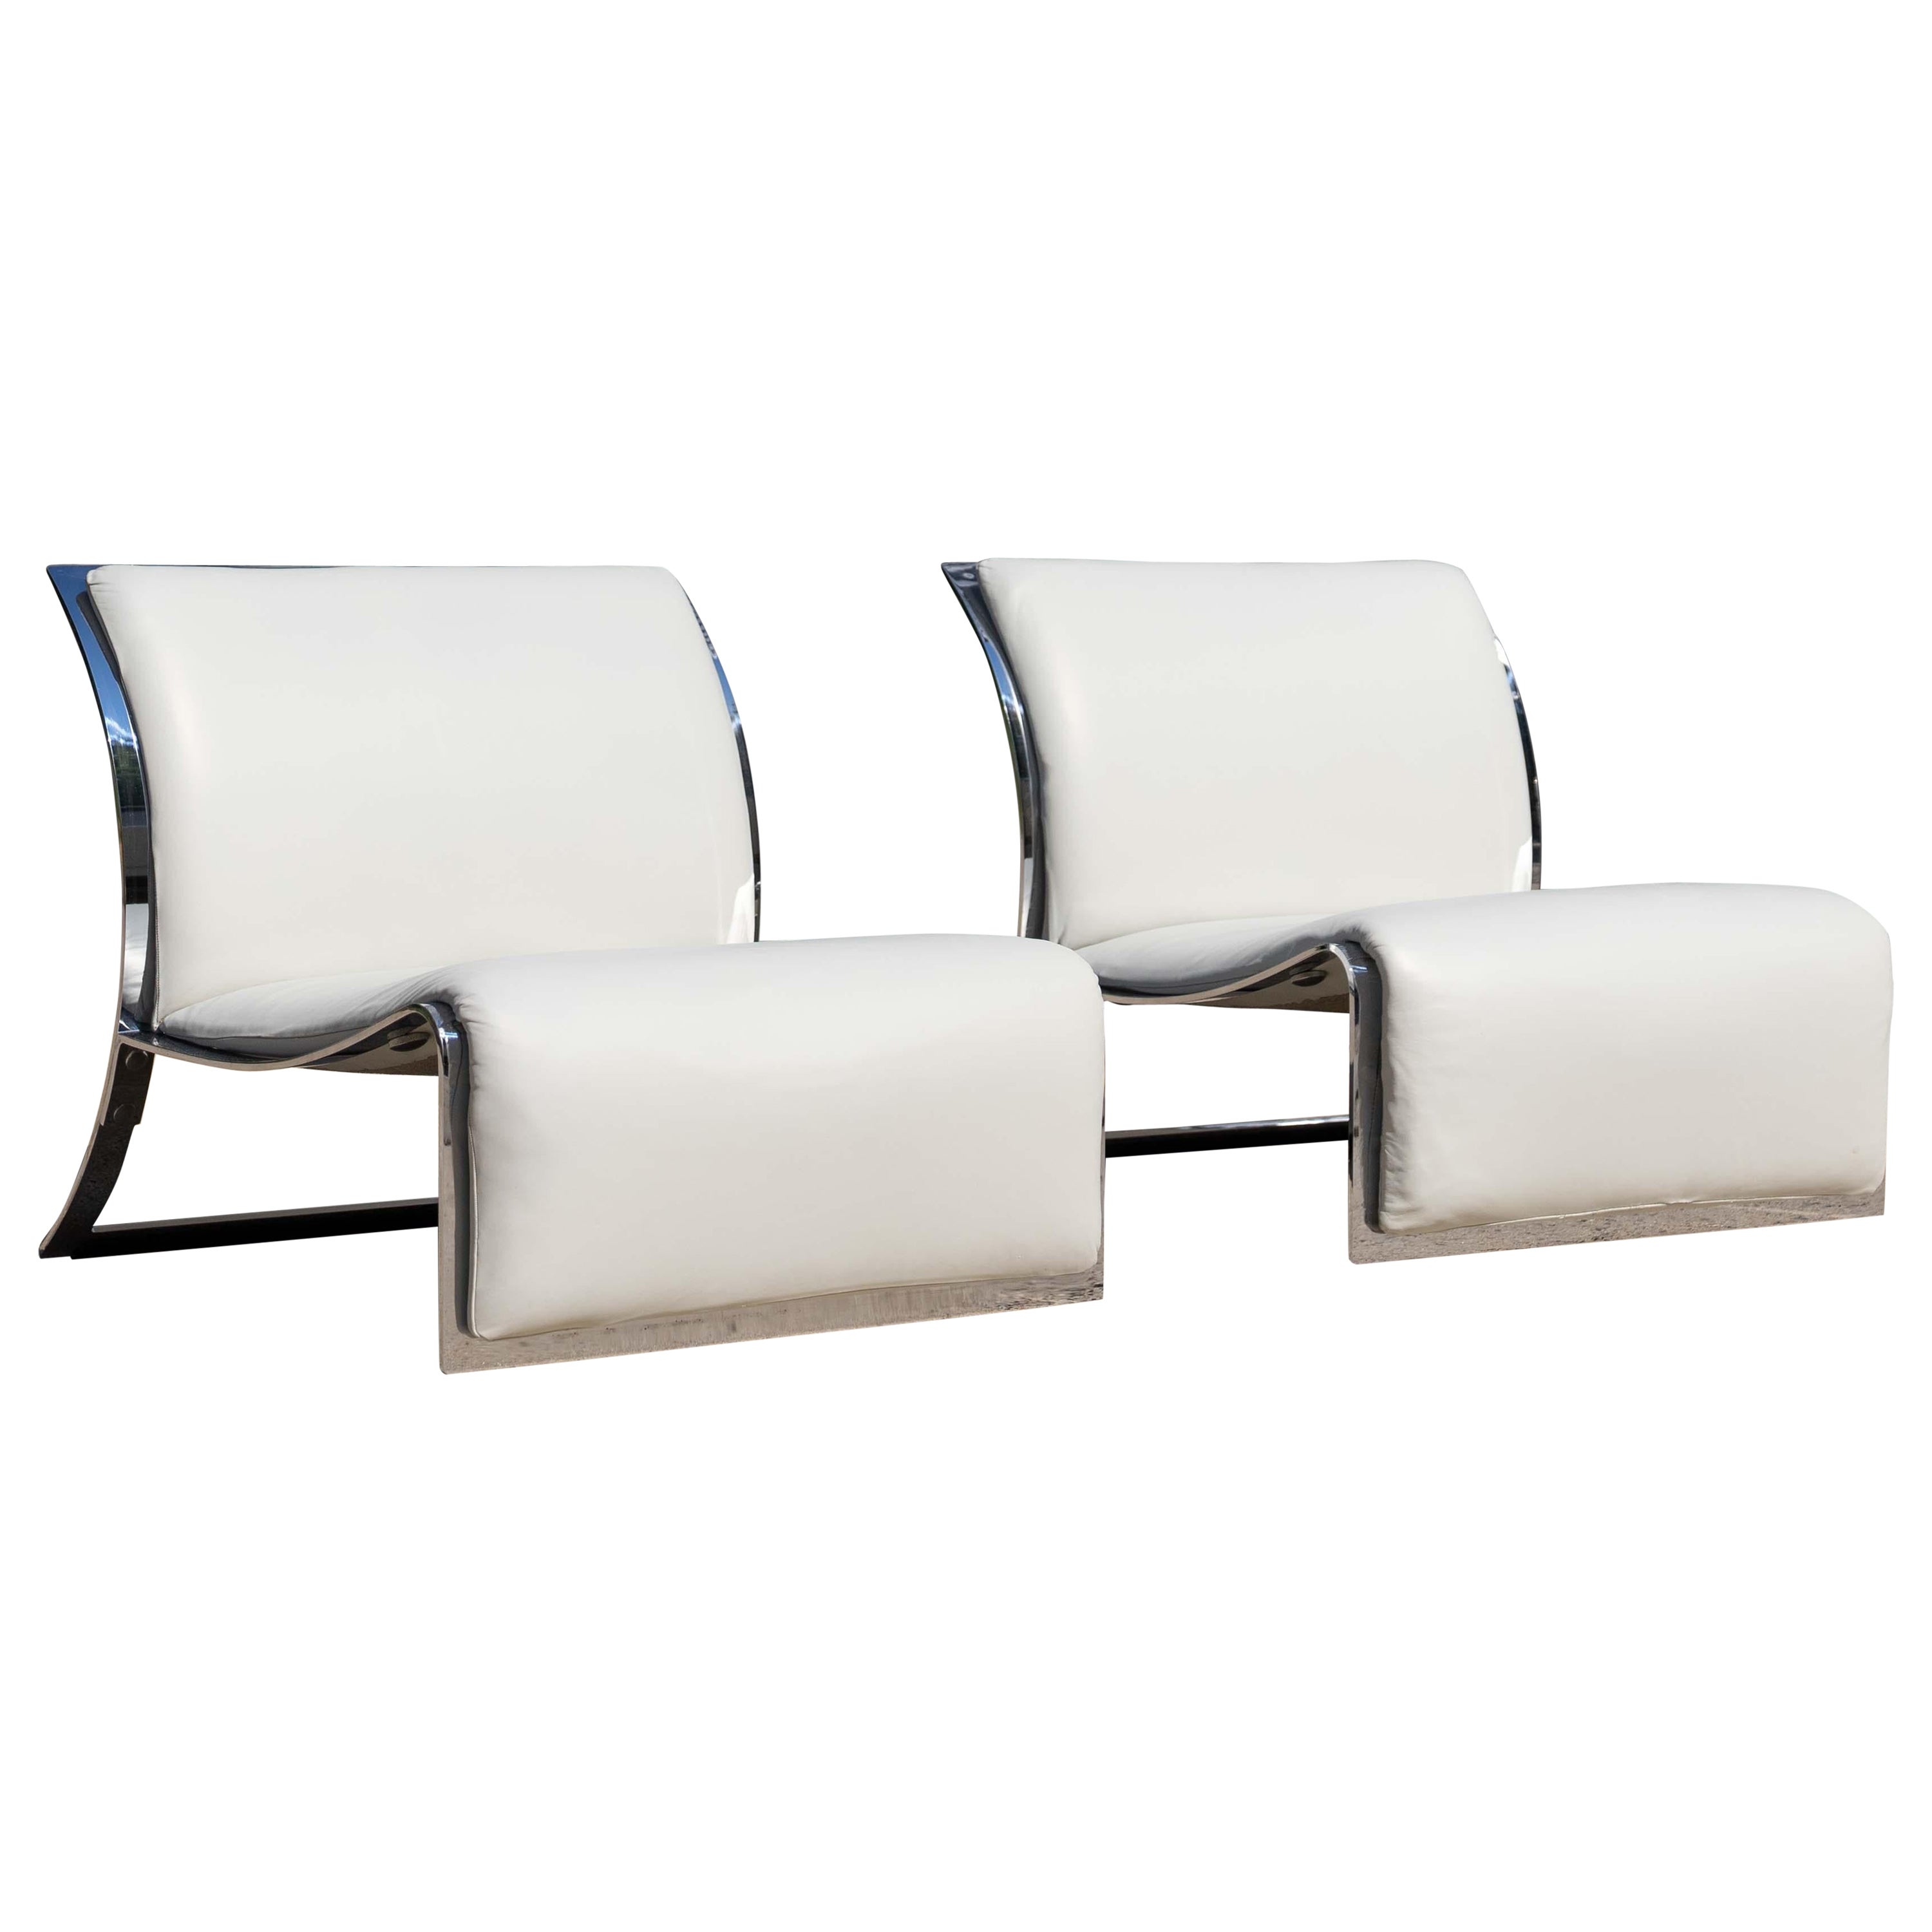 Pair Lounge Chairs by Vittorio Introini for Saporiti, Italy